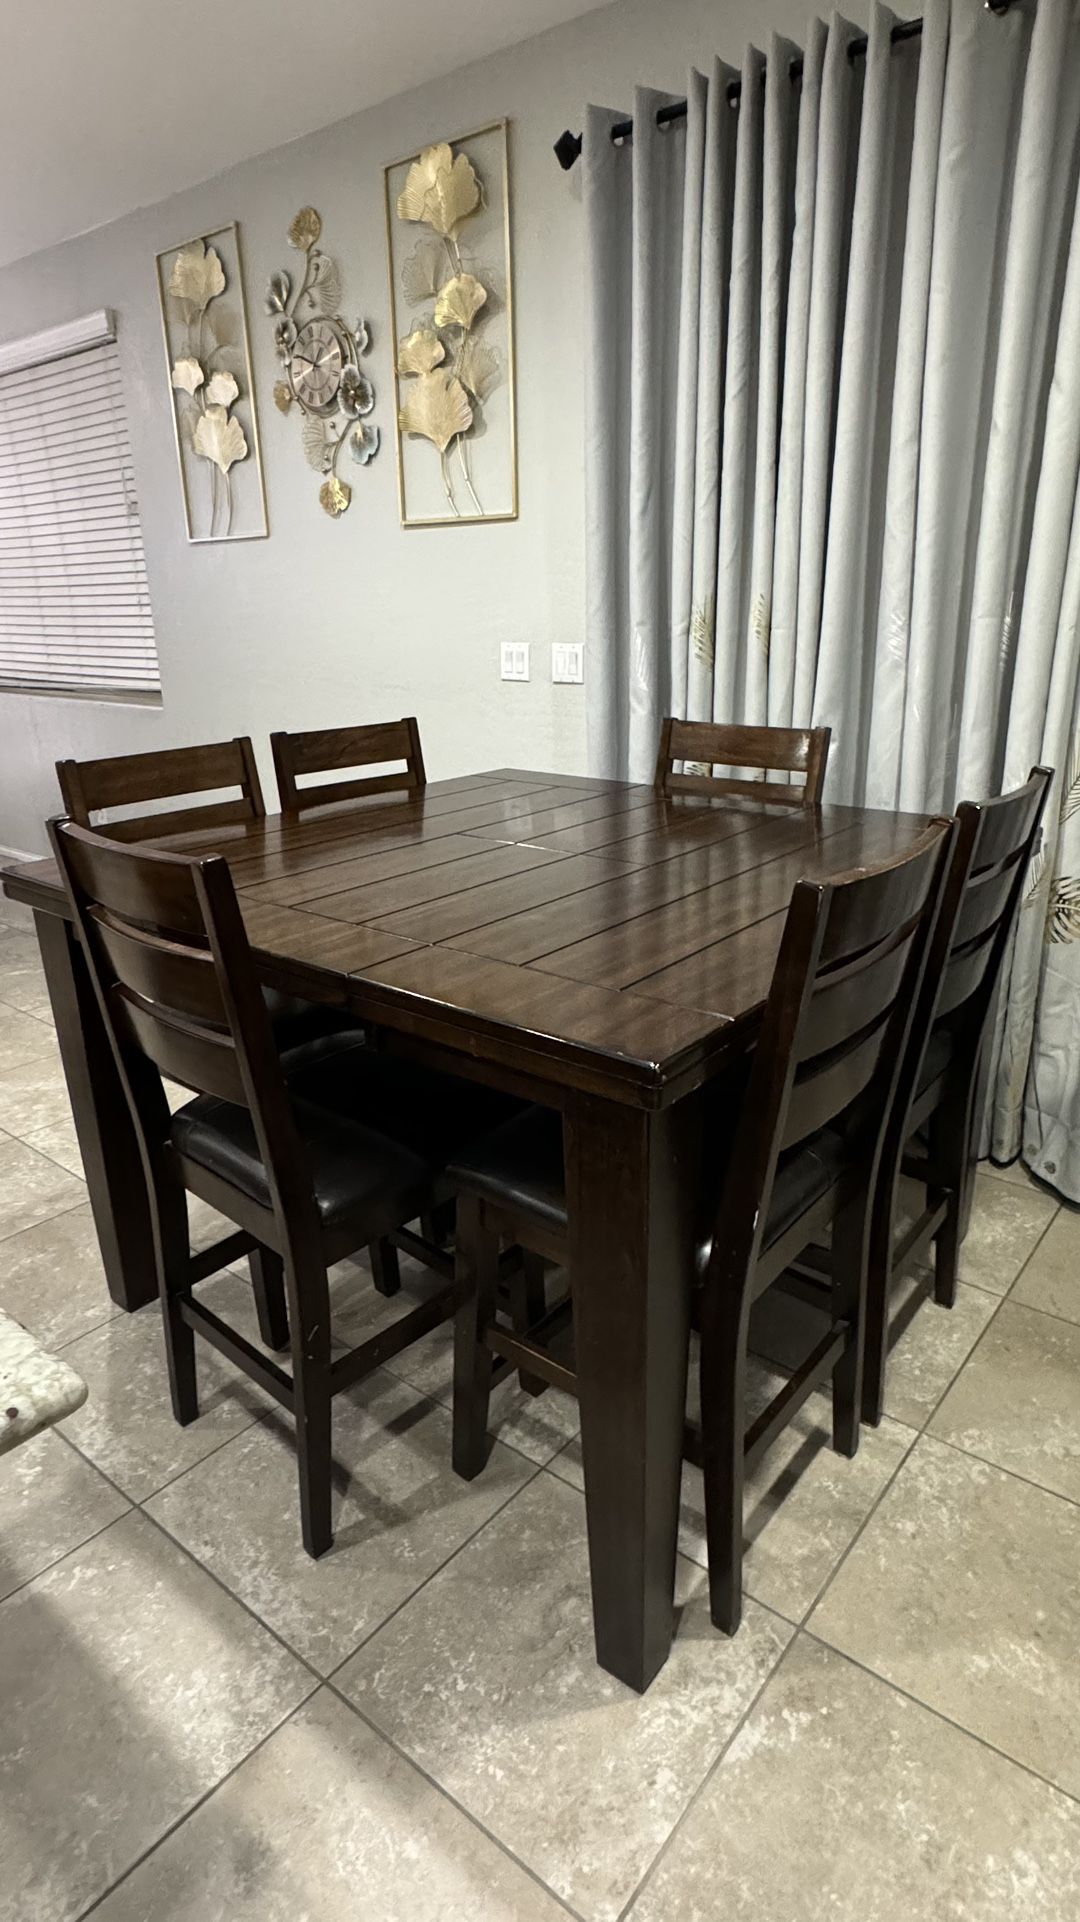 Adjustable Dining table with 6 Chairs and free chair cover